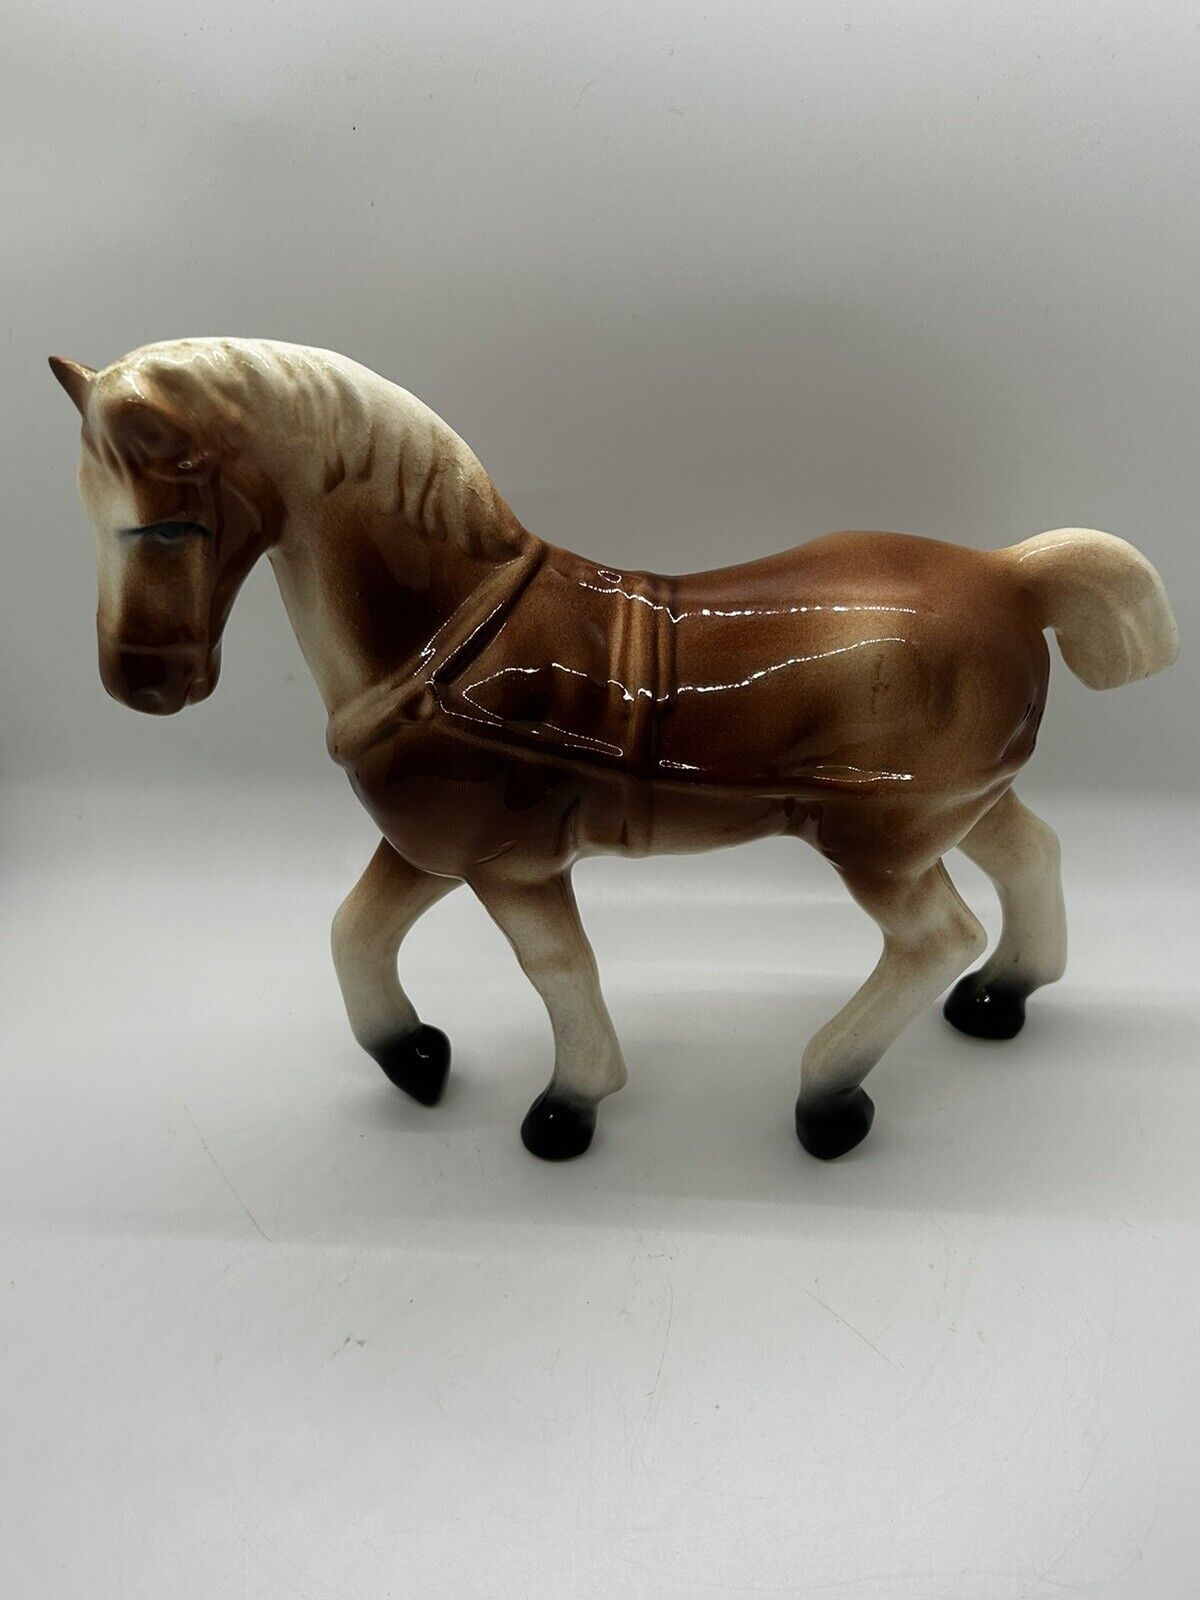 7.5” Antique 1940s Ceramic Plow Horse Figurine Brown/White With Harness